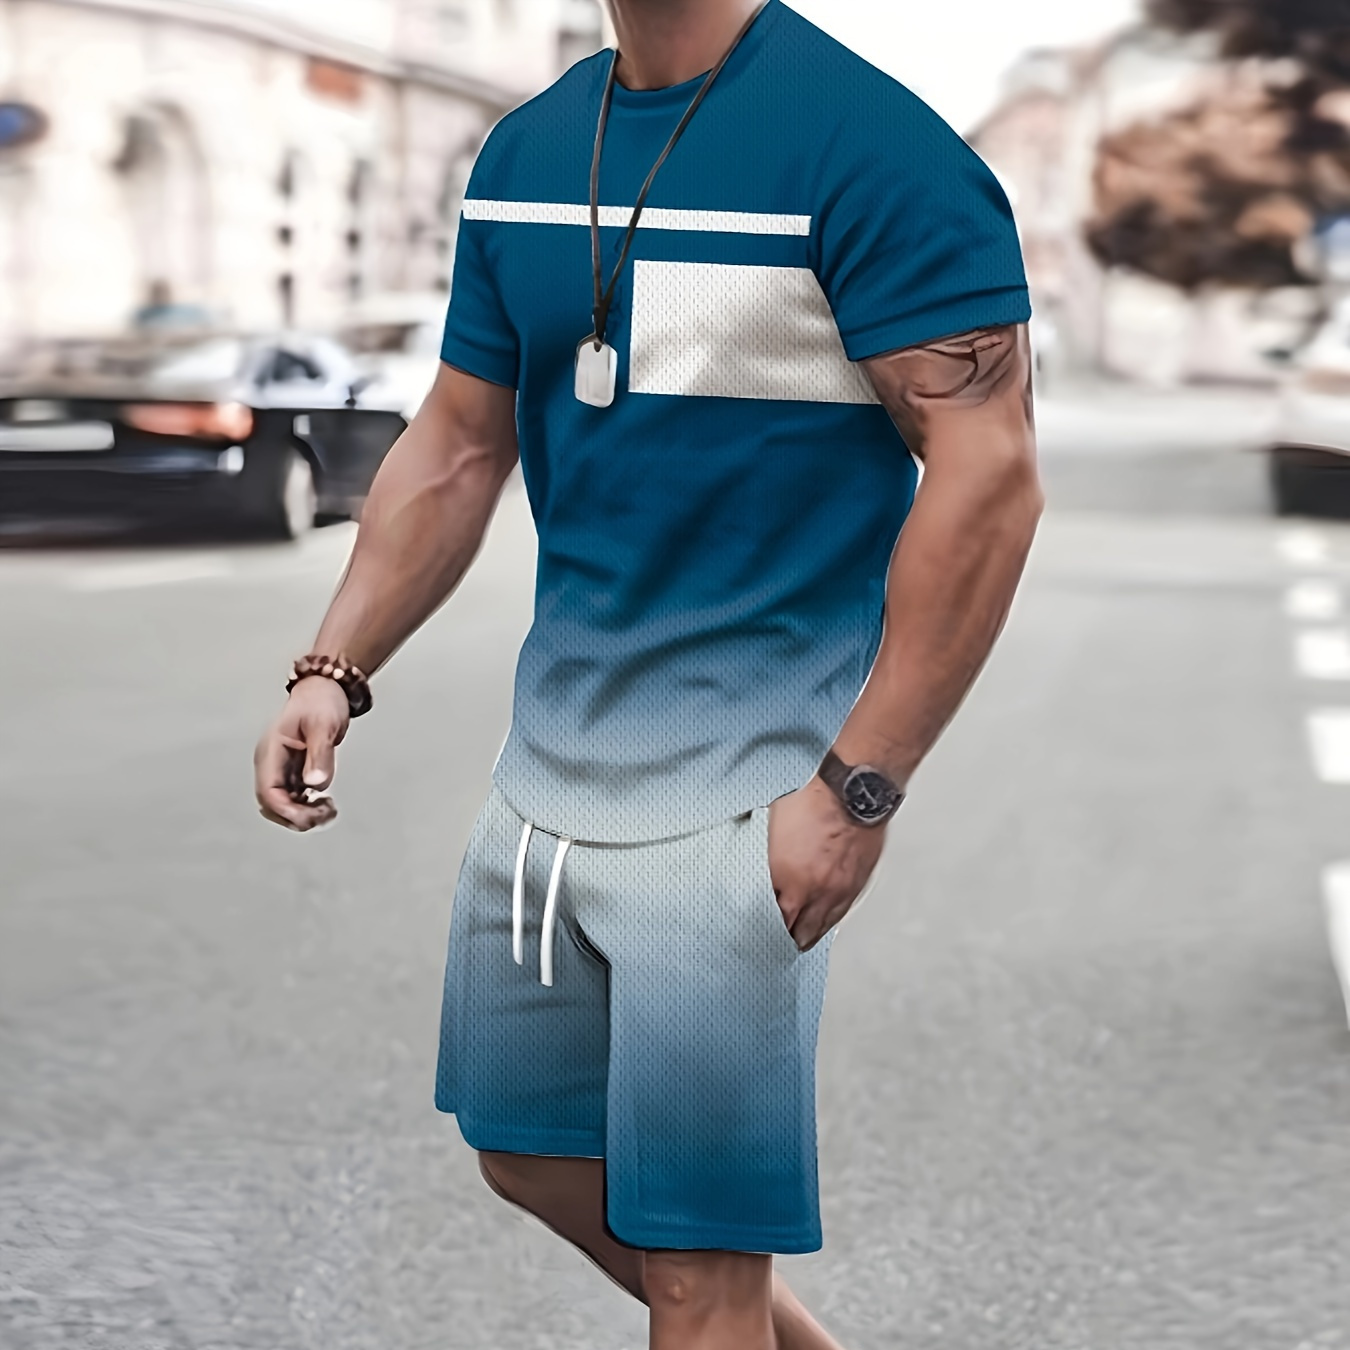 

Color Block 2pcs Trendy Outfits For Men, Casual Crew Neck Short Sleeve T-shirt And Shorts Set For Summer, Men's Clothing Vacation Workout